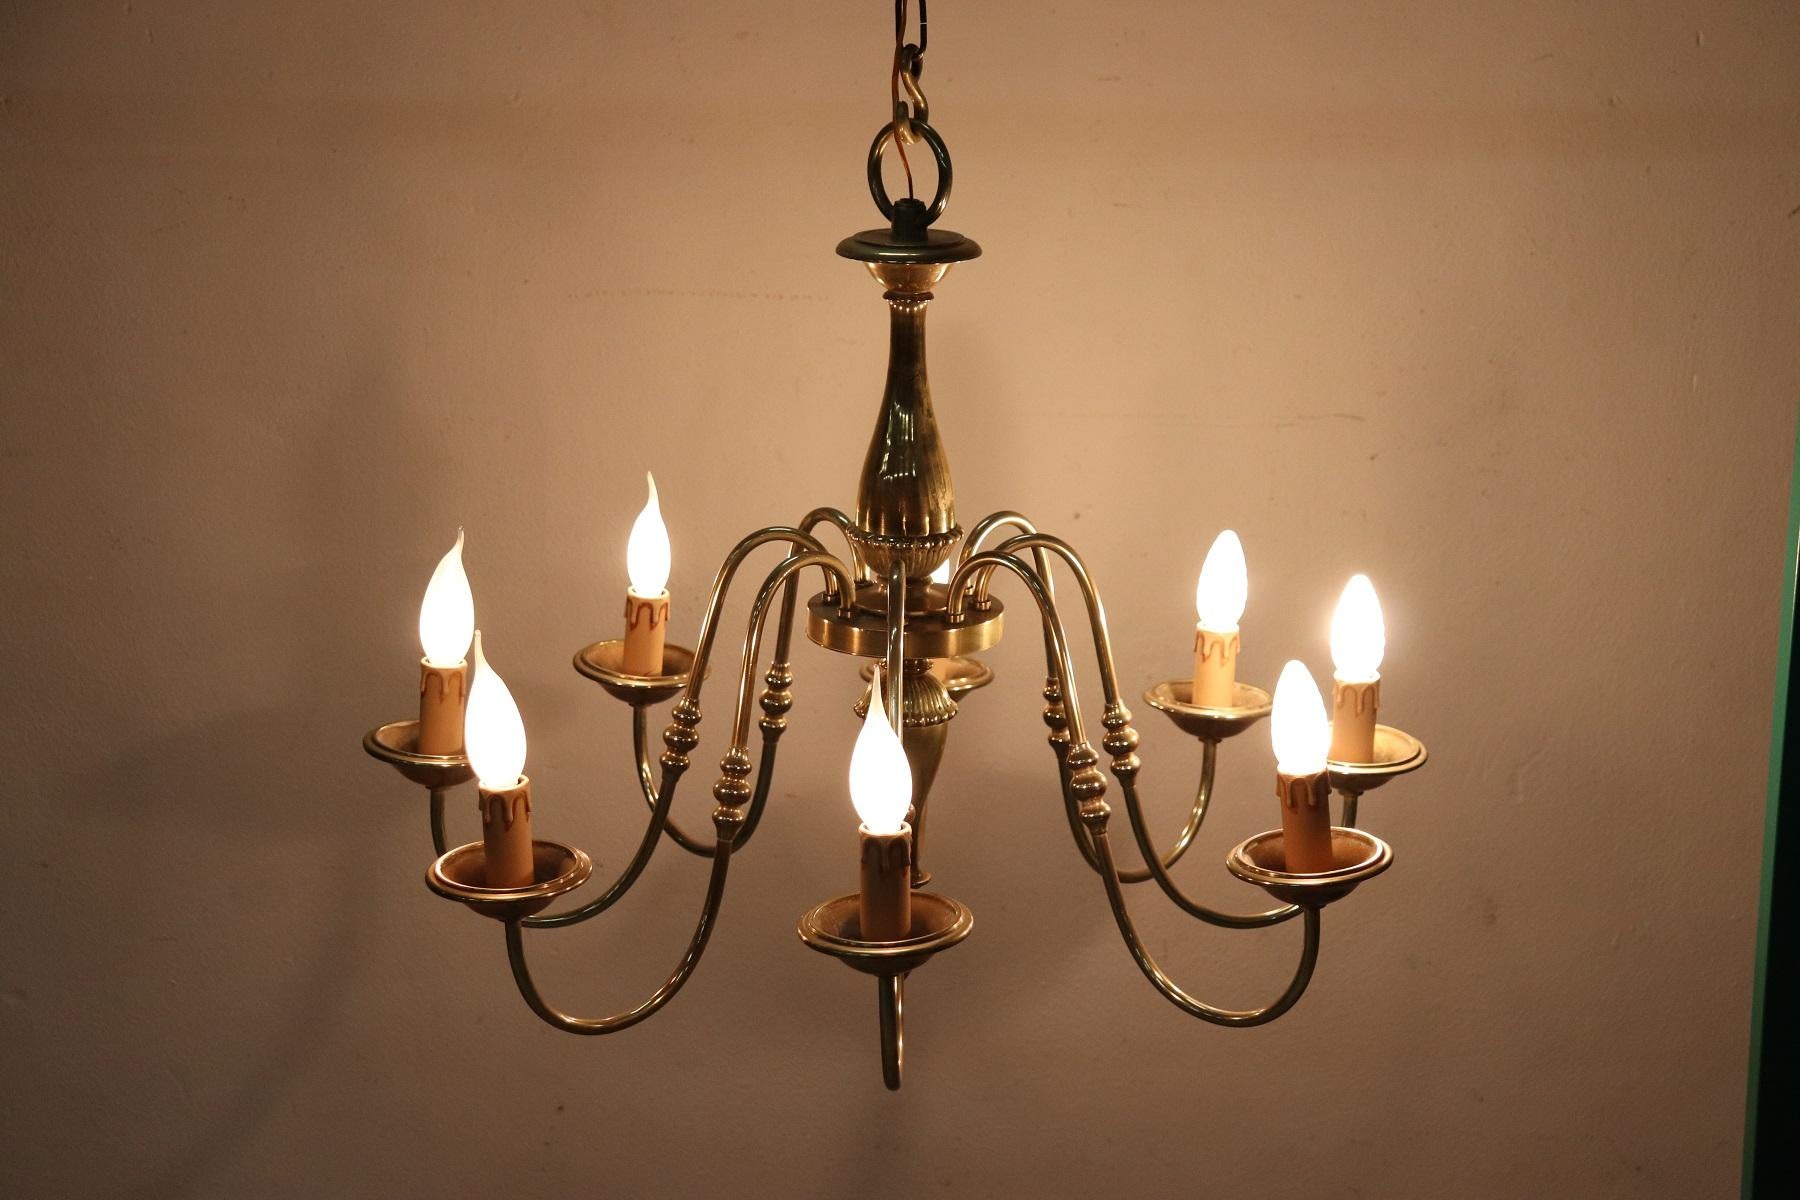 Beautiful and refined Italian chandelier 20th century, 1950s total eight lights. The chandelier is made with the Classic golden brass. Fully functional. The total height measurement shown can be changed by adding or removing links to the chain. The